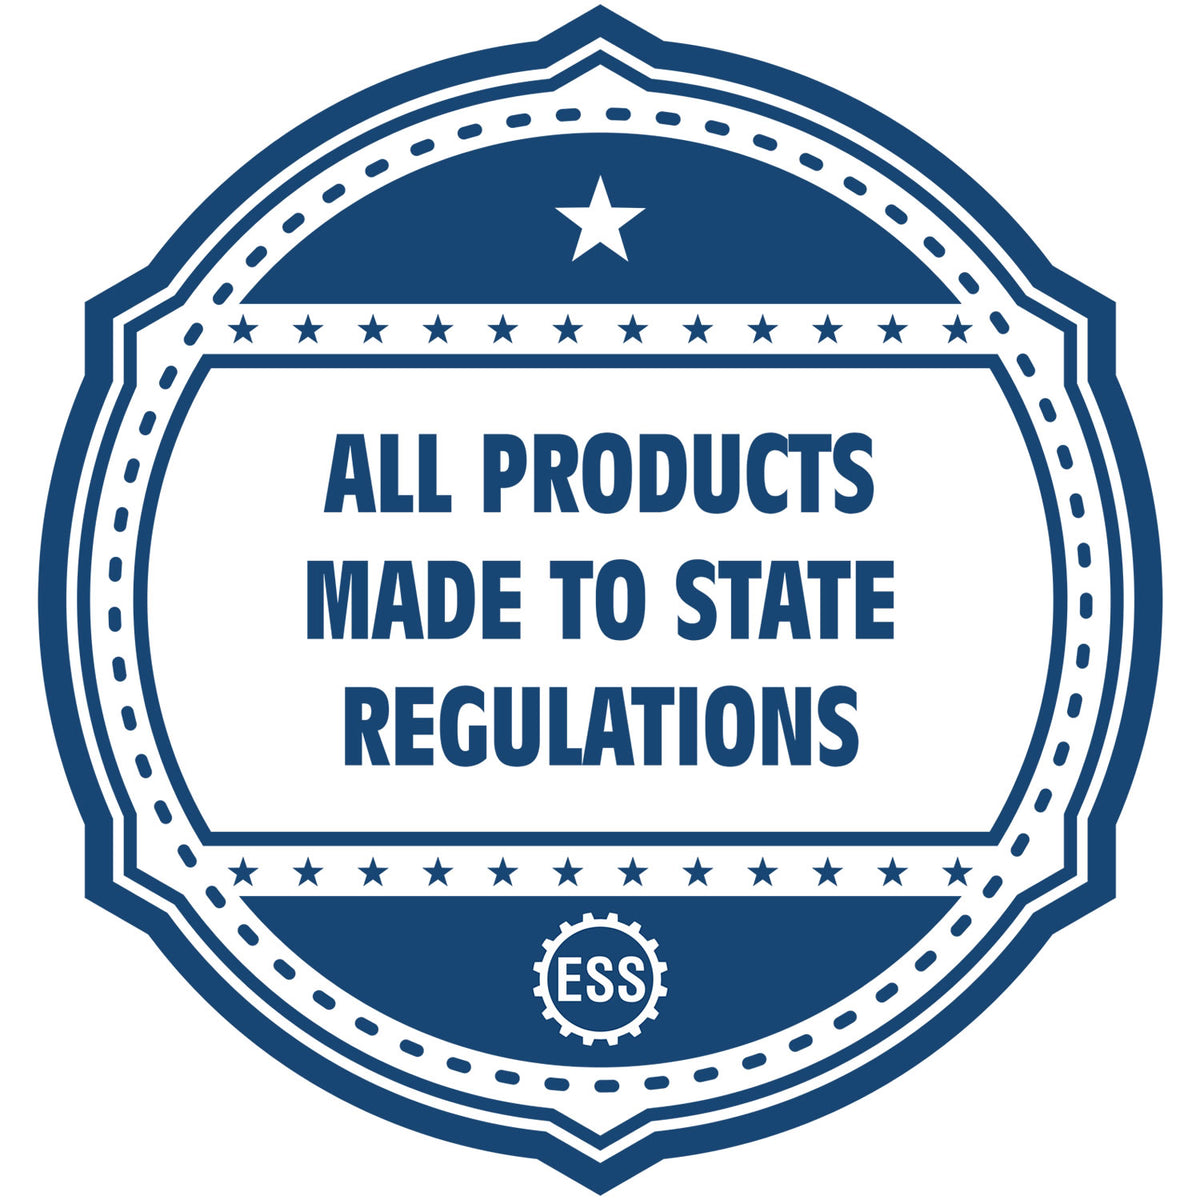 An icon or badge element for the Handheld Mississippi Architect Seal Embosser showing that this product is made in compliance with state regulations.